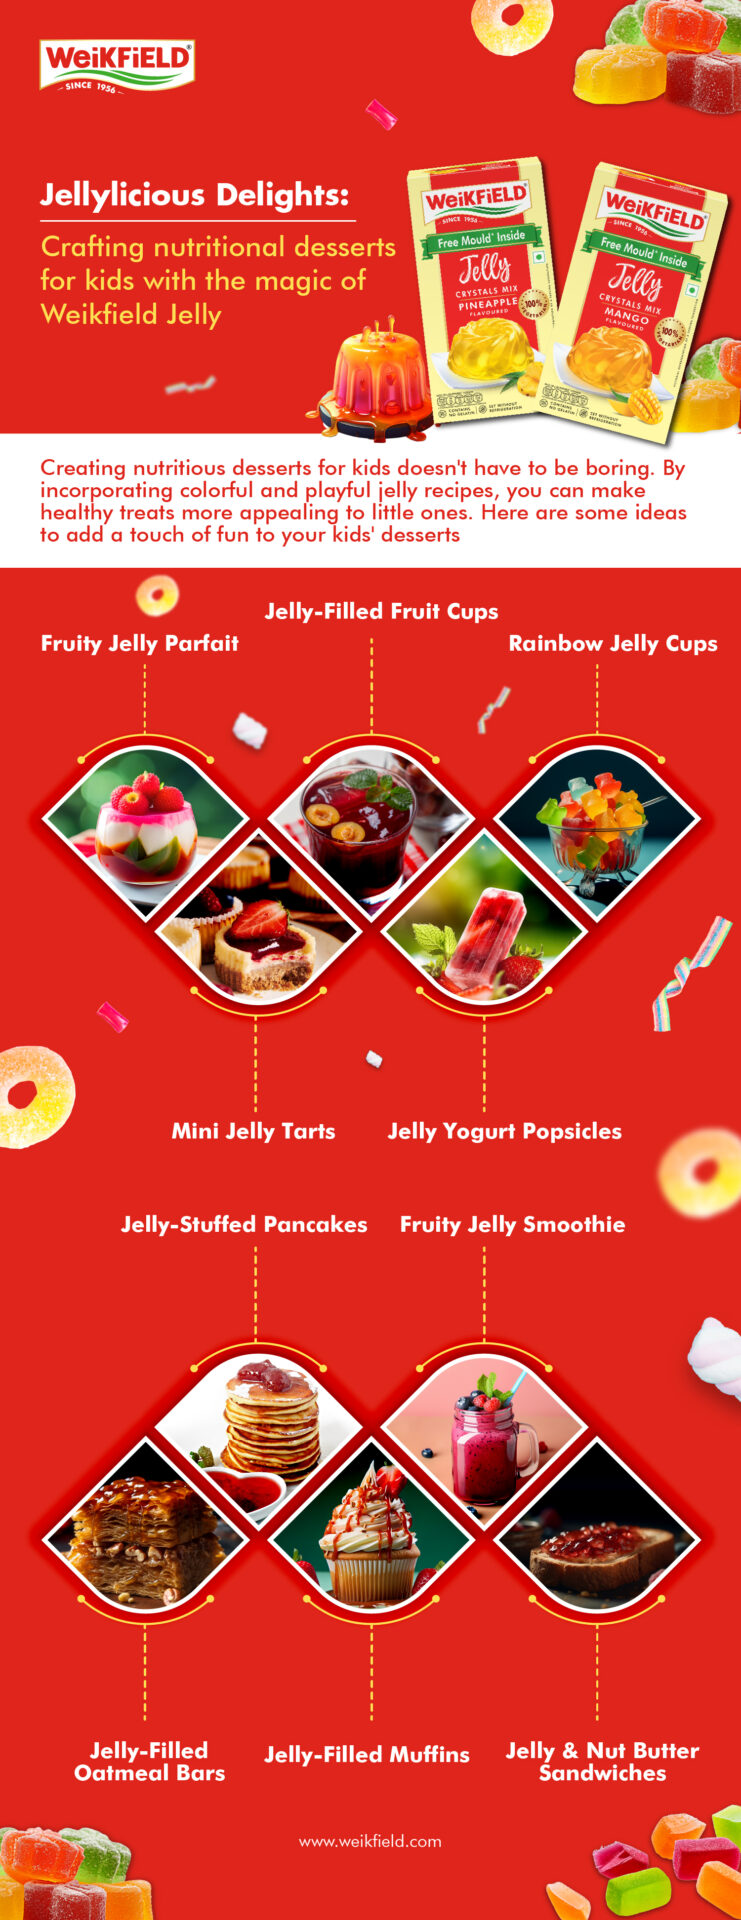 Jellylicious Delights – Crafting nutritional desserts for kids with the magic of Weikfield Jelly